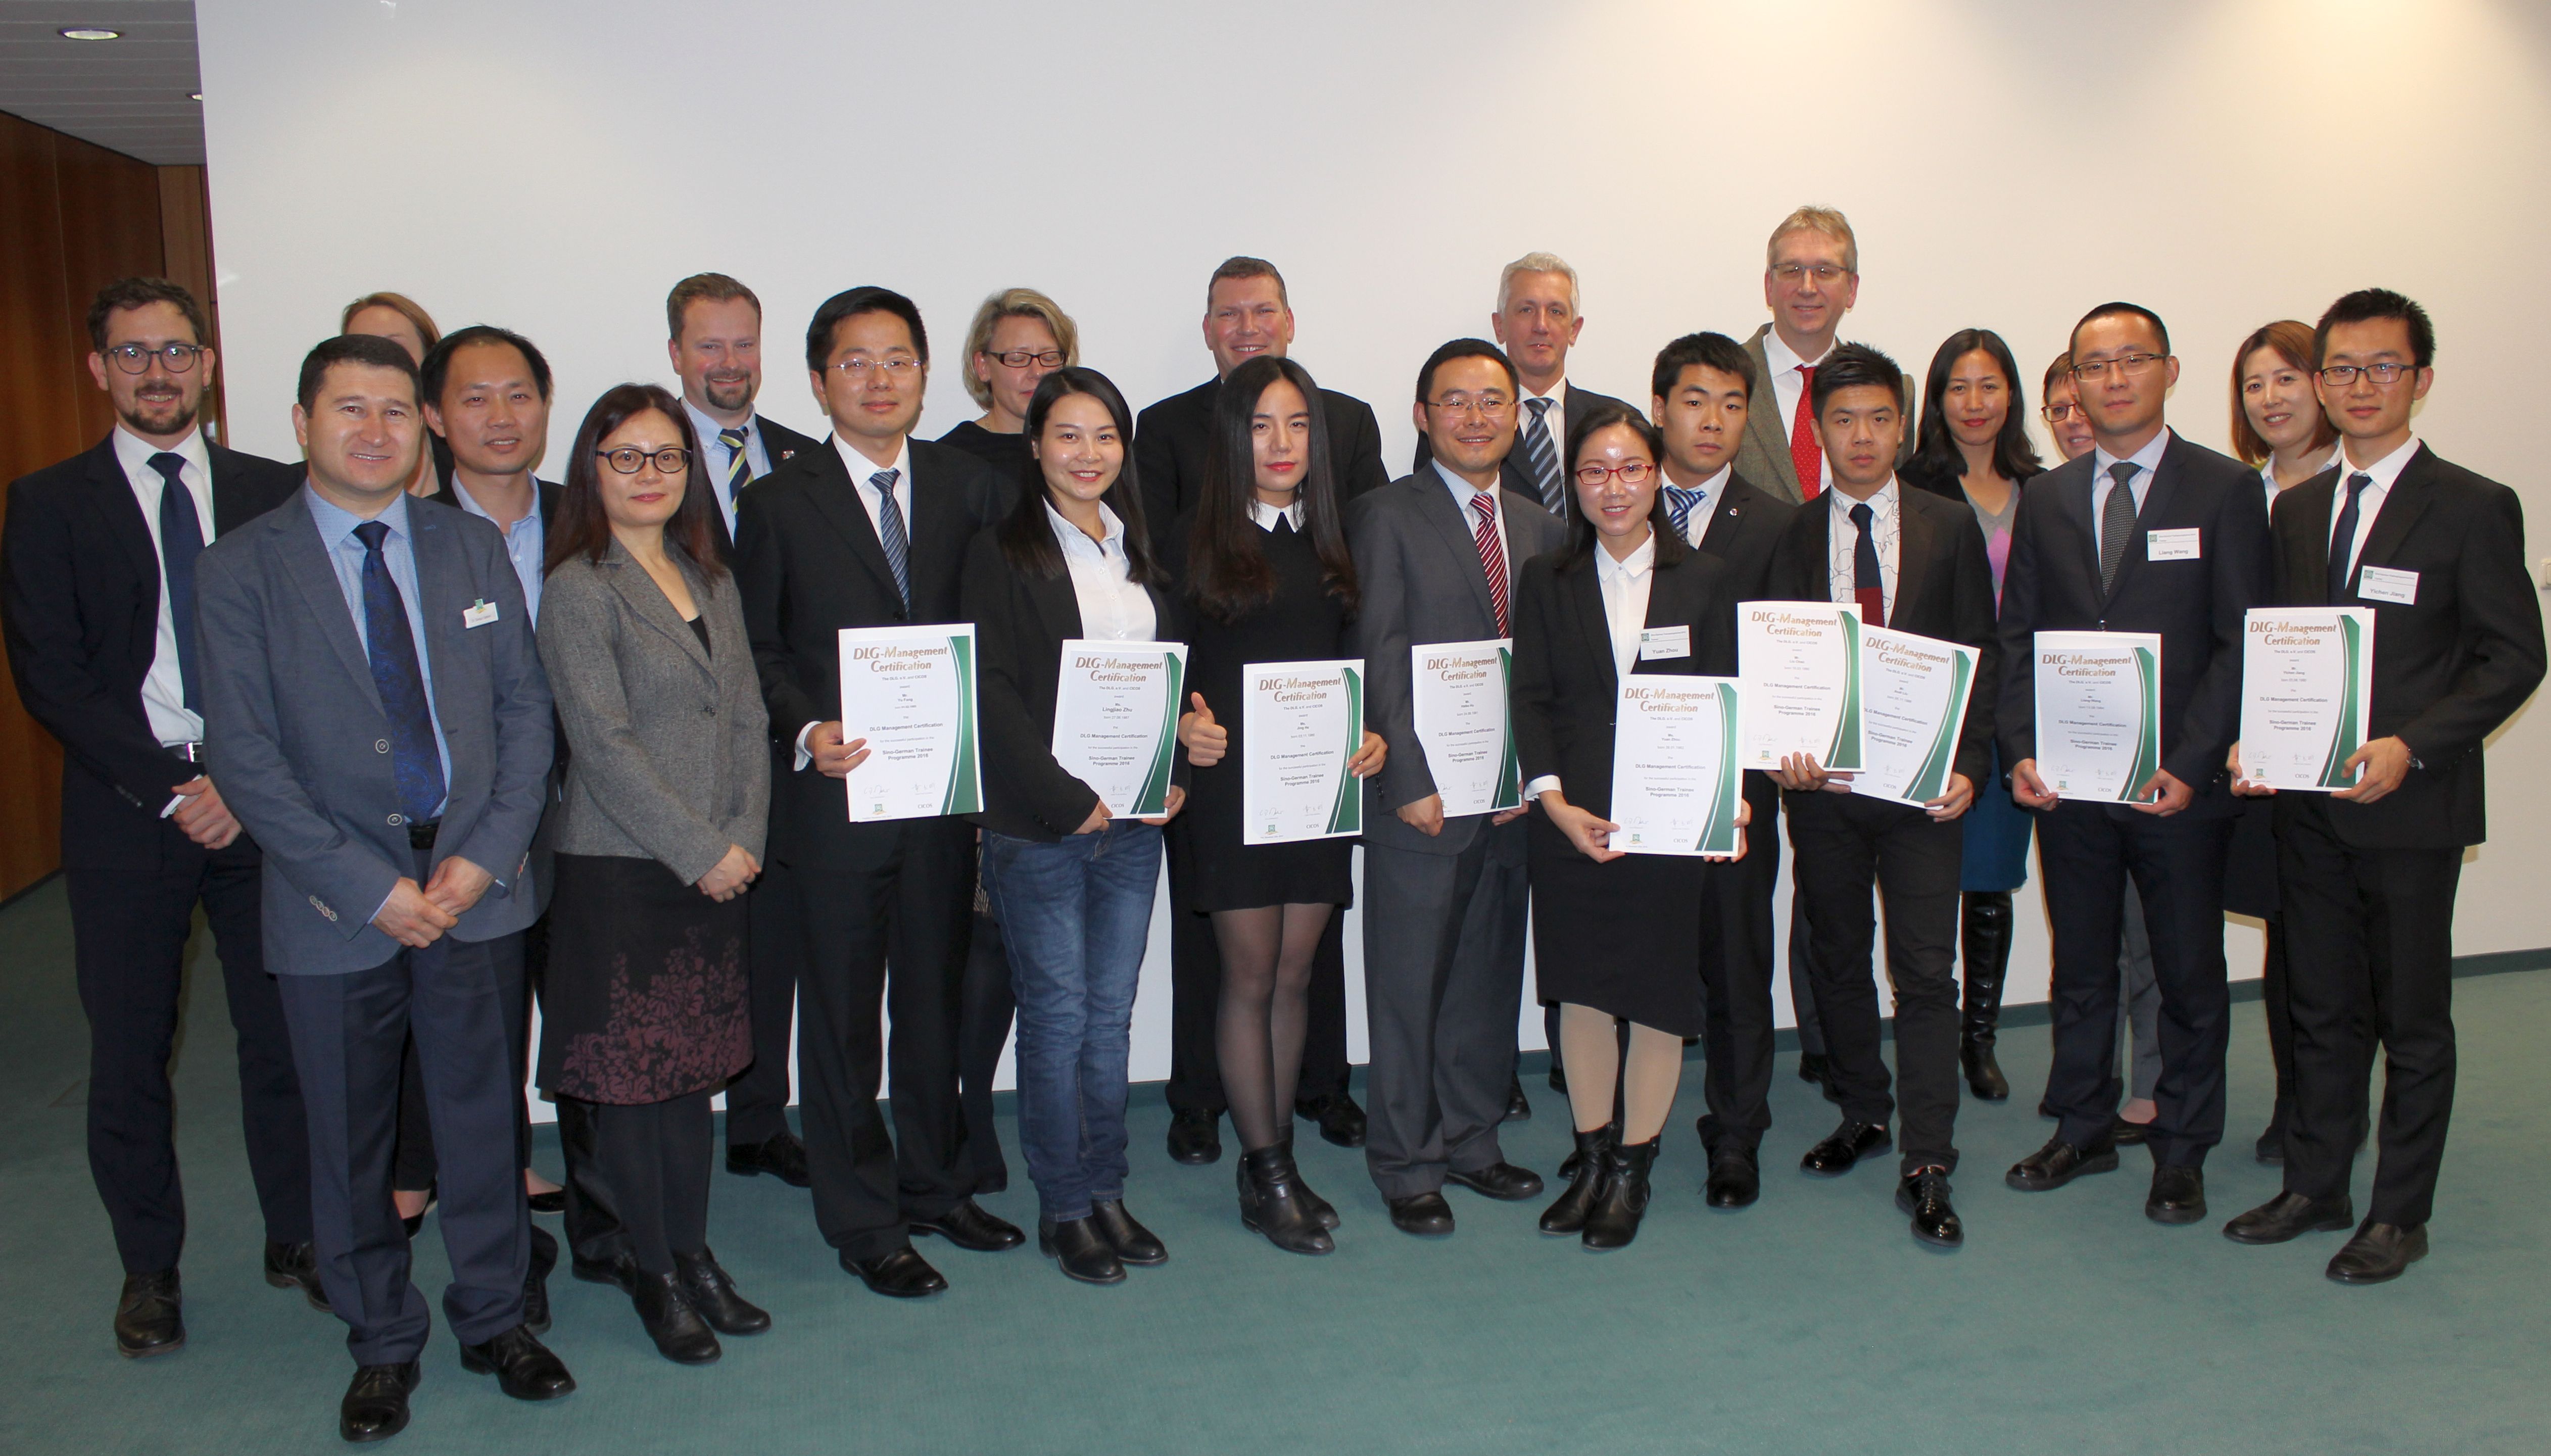 DLG and CICOS issued graduation certifications to 10 Chinese young agricultural professionals of the Sino-German Trainee Programme Phase II